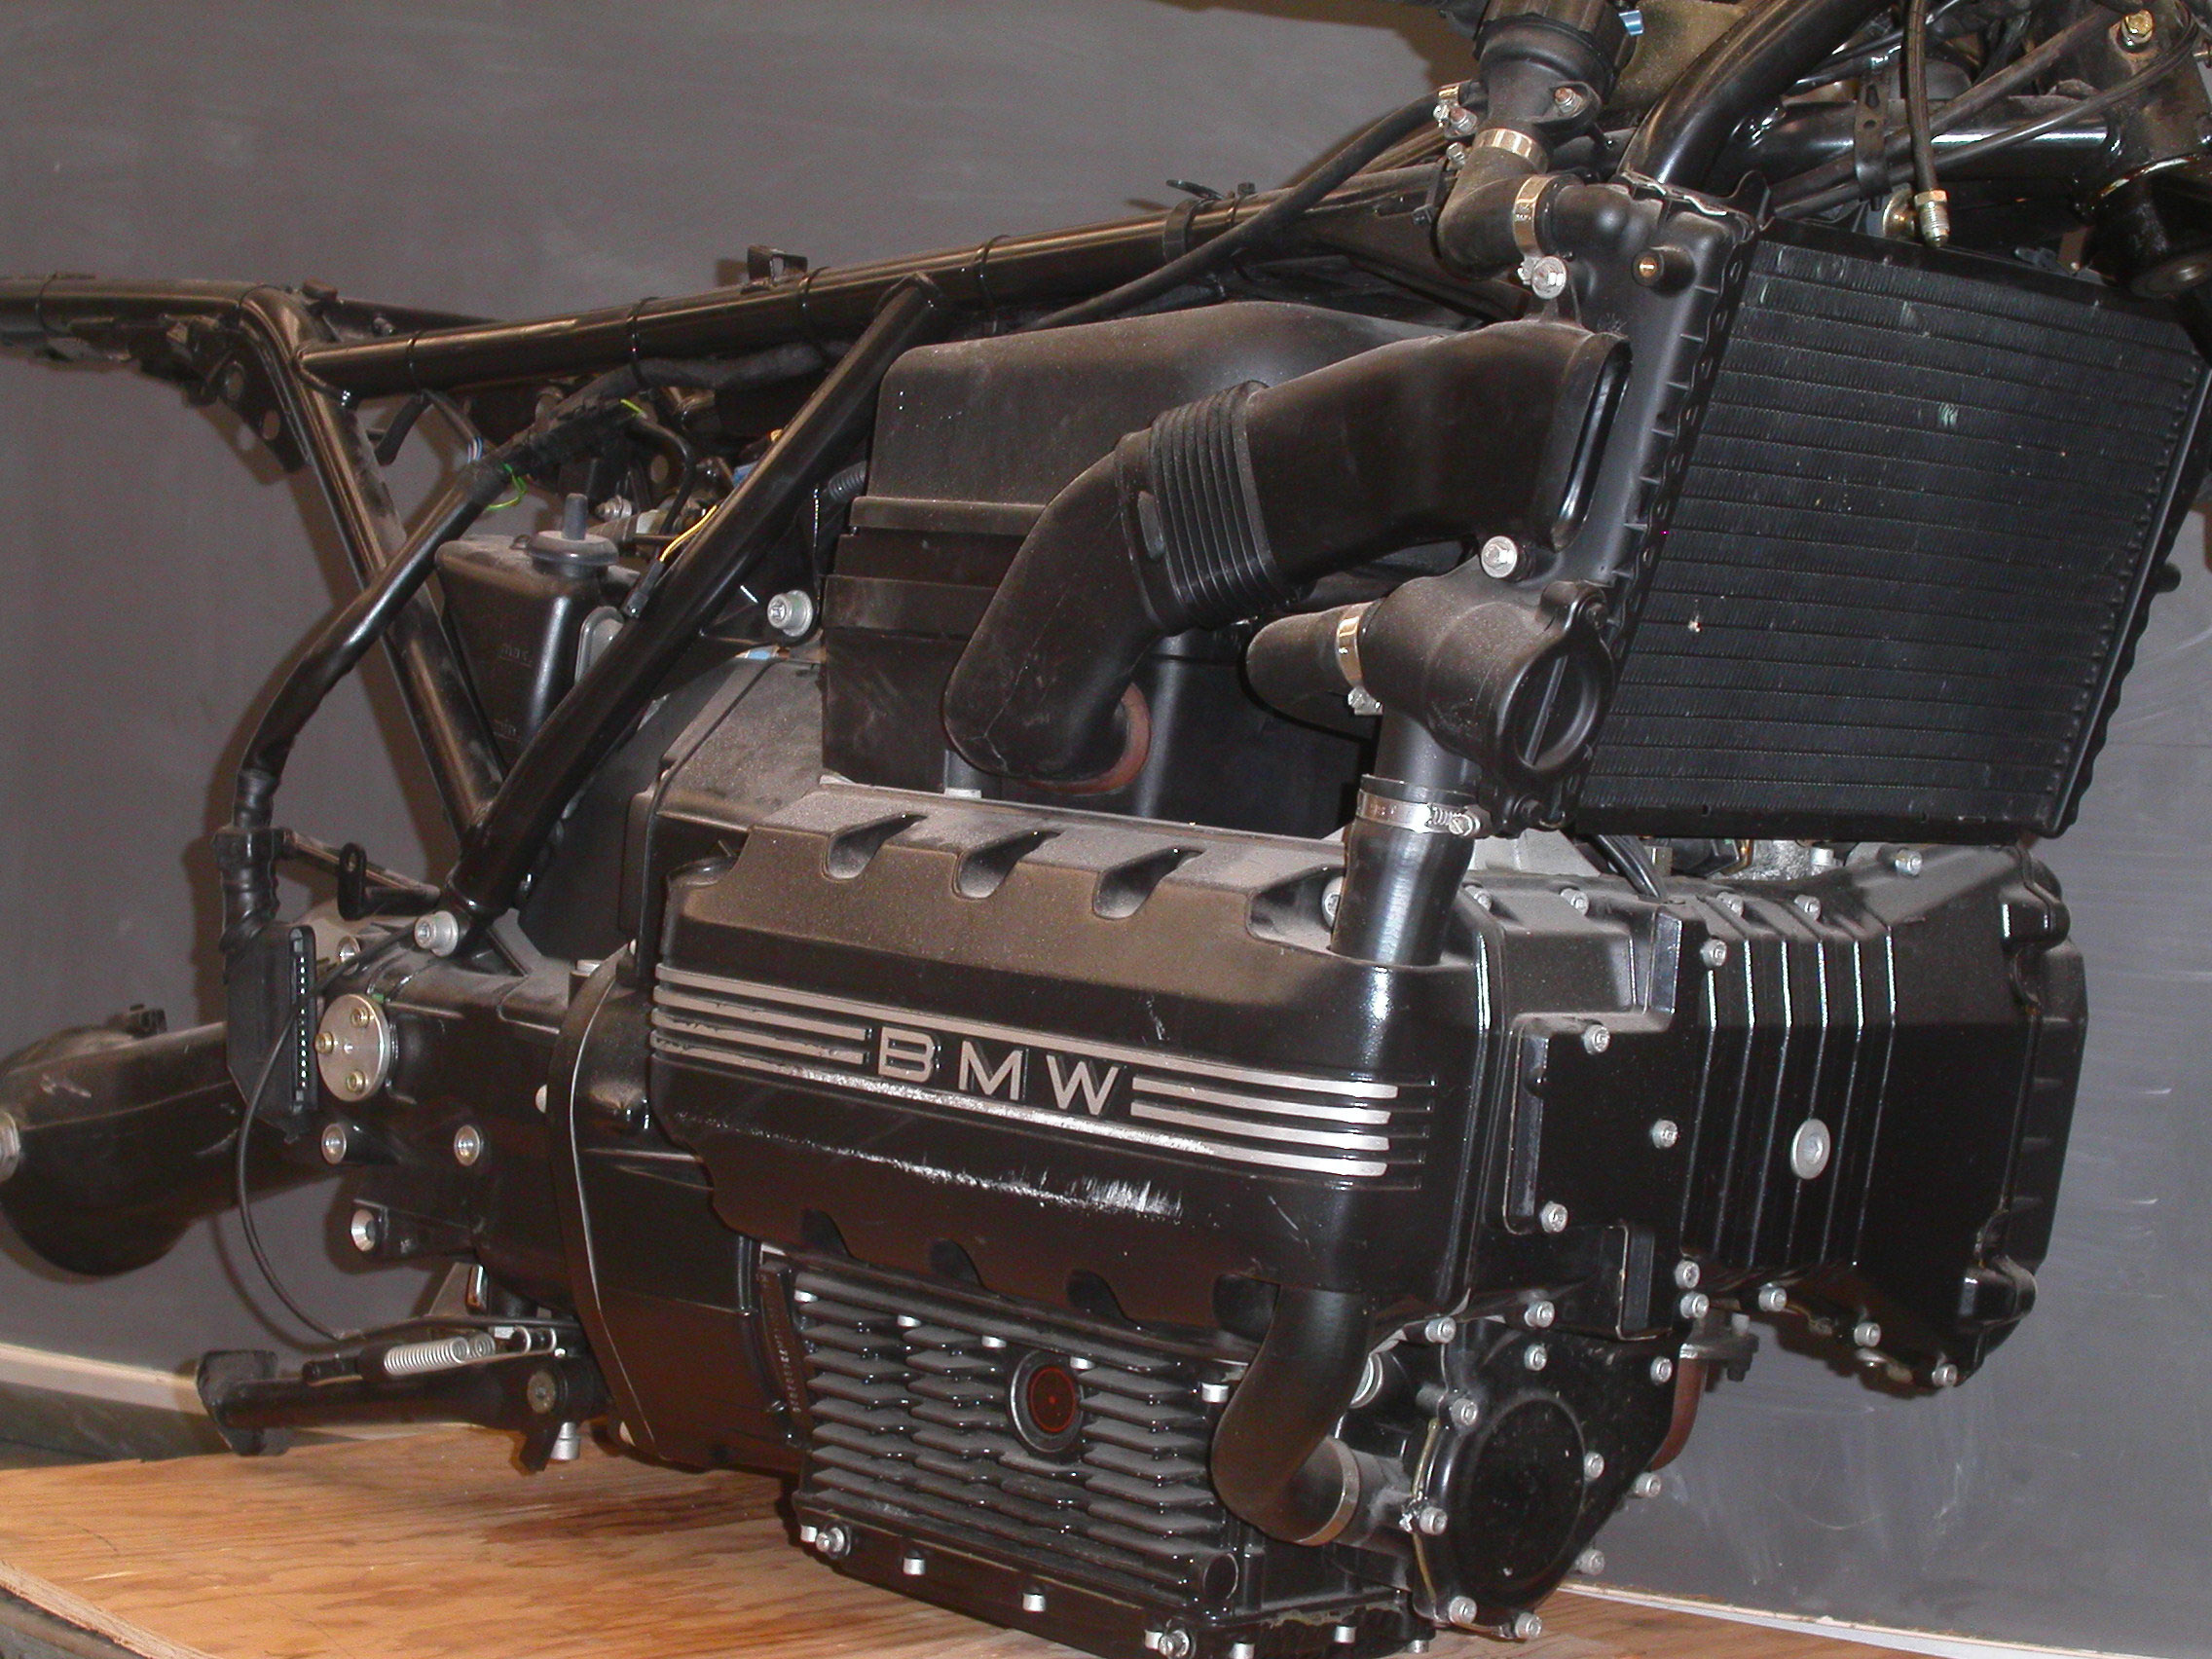 Multimedia Gallery - The salvaged 100 horespower BMW motorcycle engine. | NSF - National Science